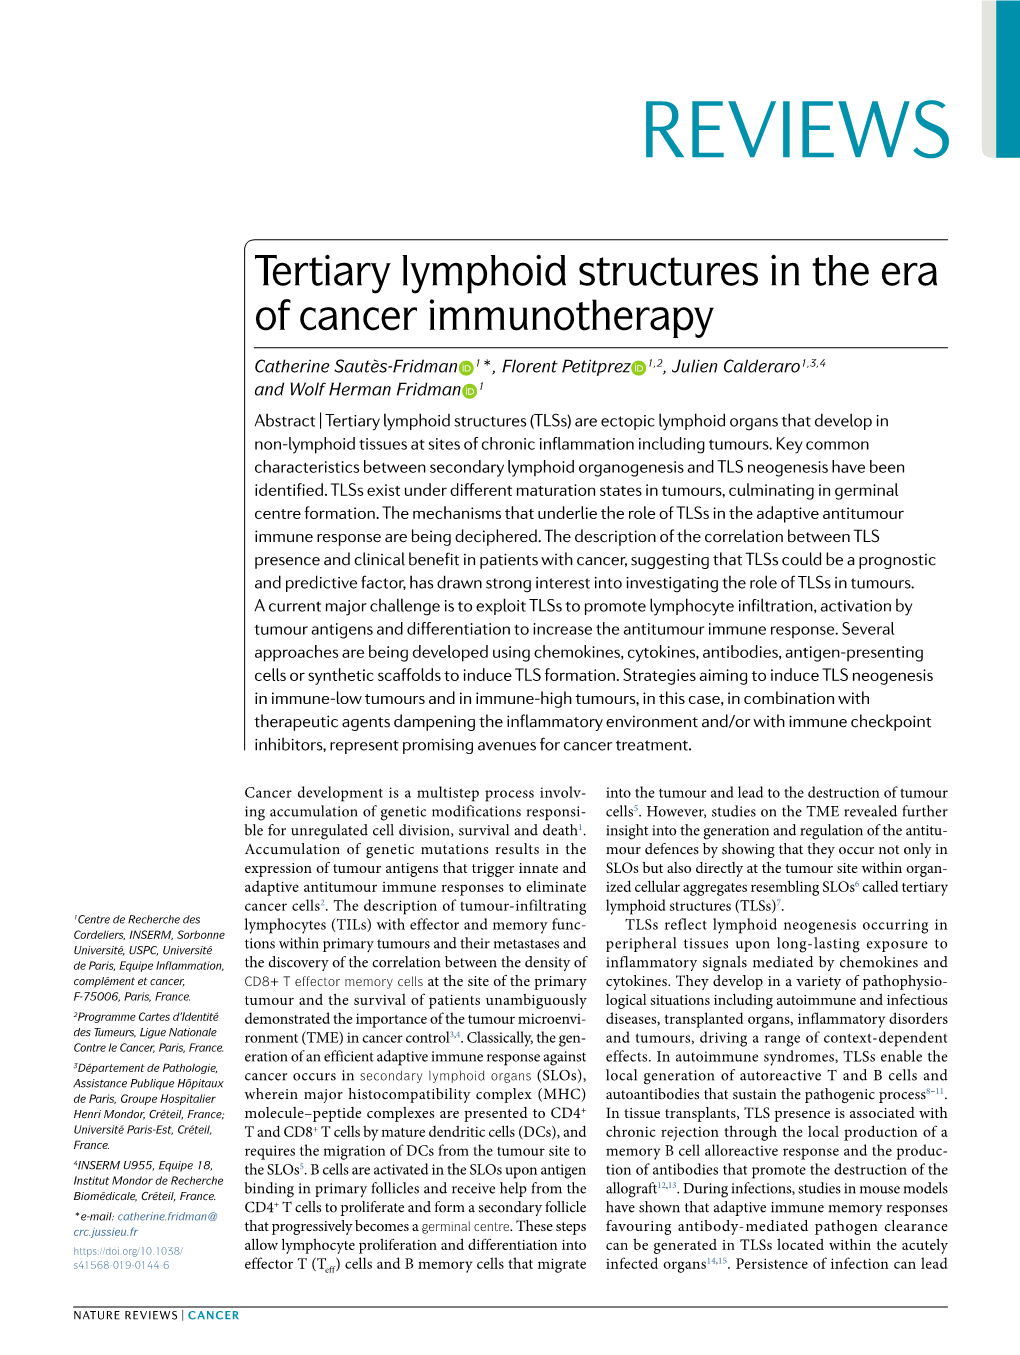 Tertiary Lymphoid Structures in the Era of Cancer Immunotherapy